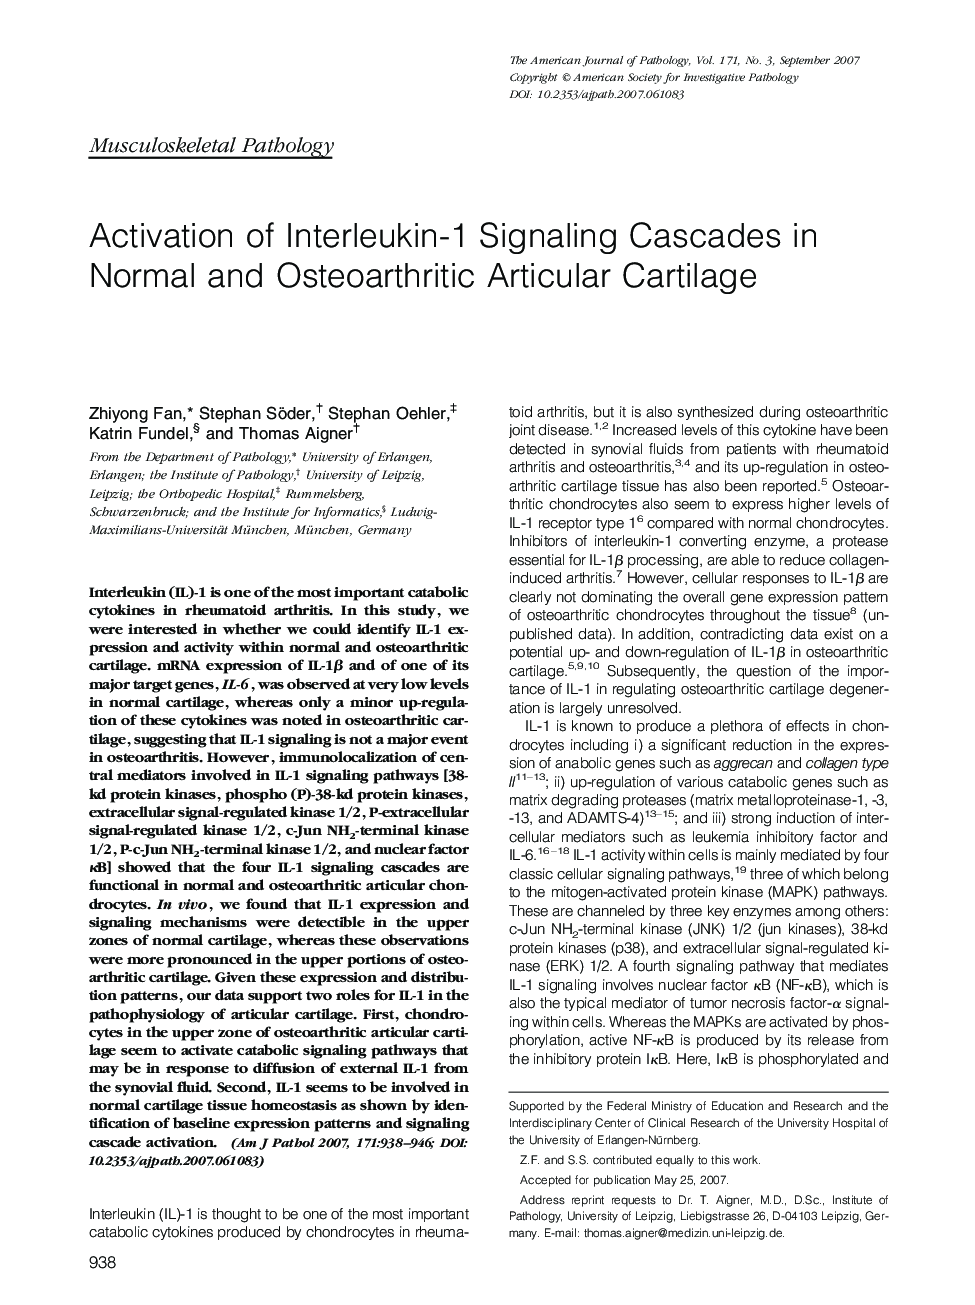 Activation of Interleukin-1 Signaling Cascades in Normal and Osteoarthritic Articular Cartilage